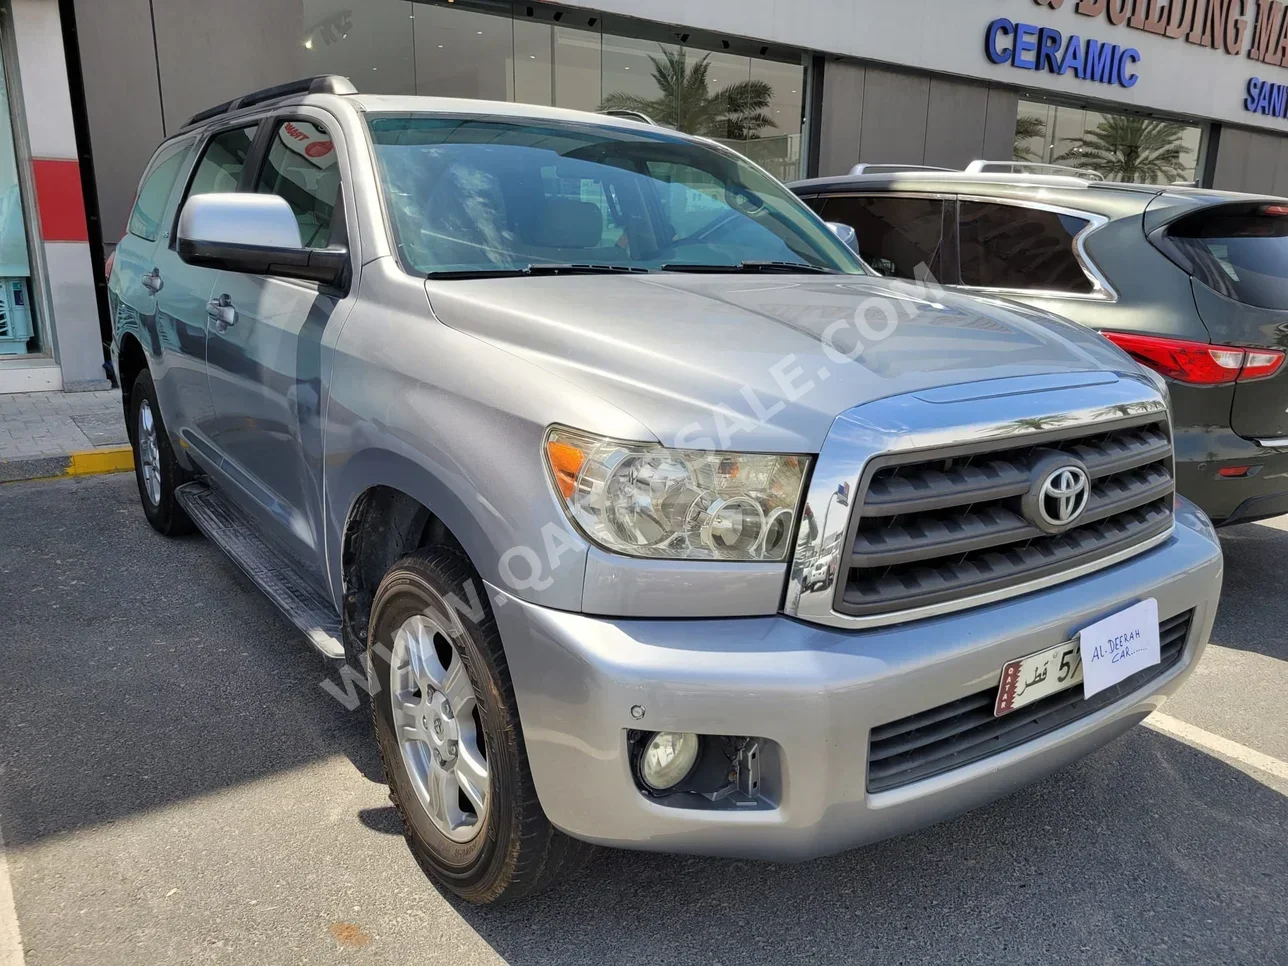 Toyota  Sequoia  2013  Automatic  372,000 Km  8 Cylinder  Four Wheel Drive (4WD)  SUV  Gray